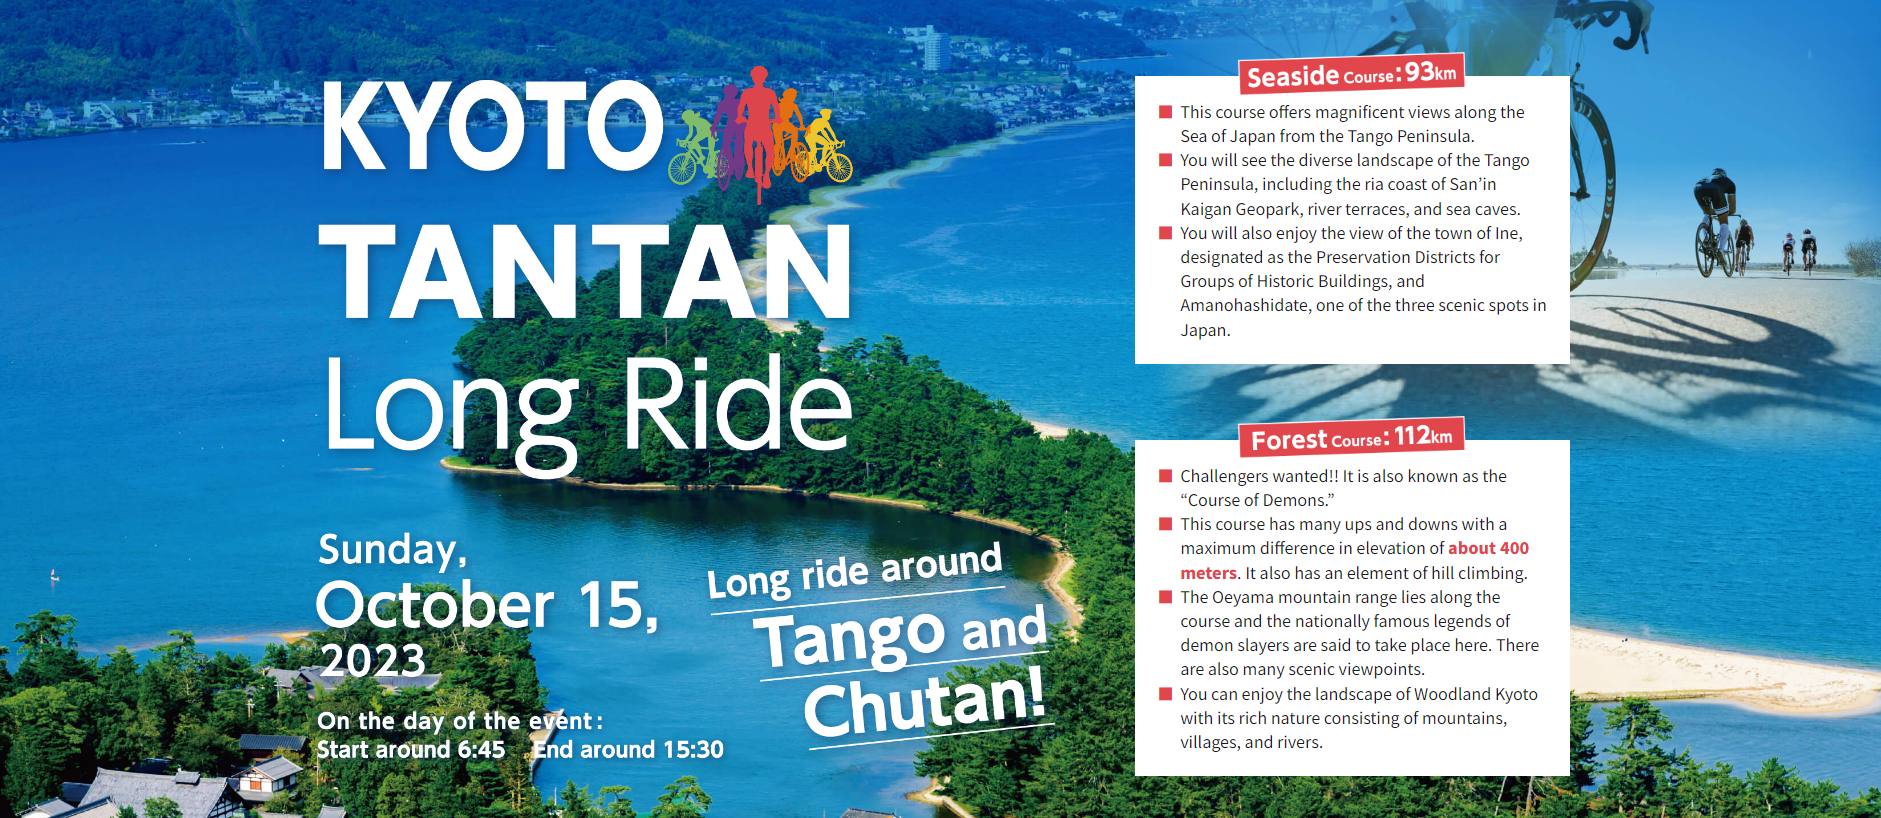 KYOTO TANTAN Long Ride will be held on October 15, 2023.